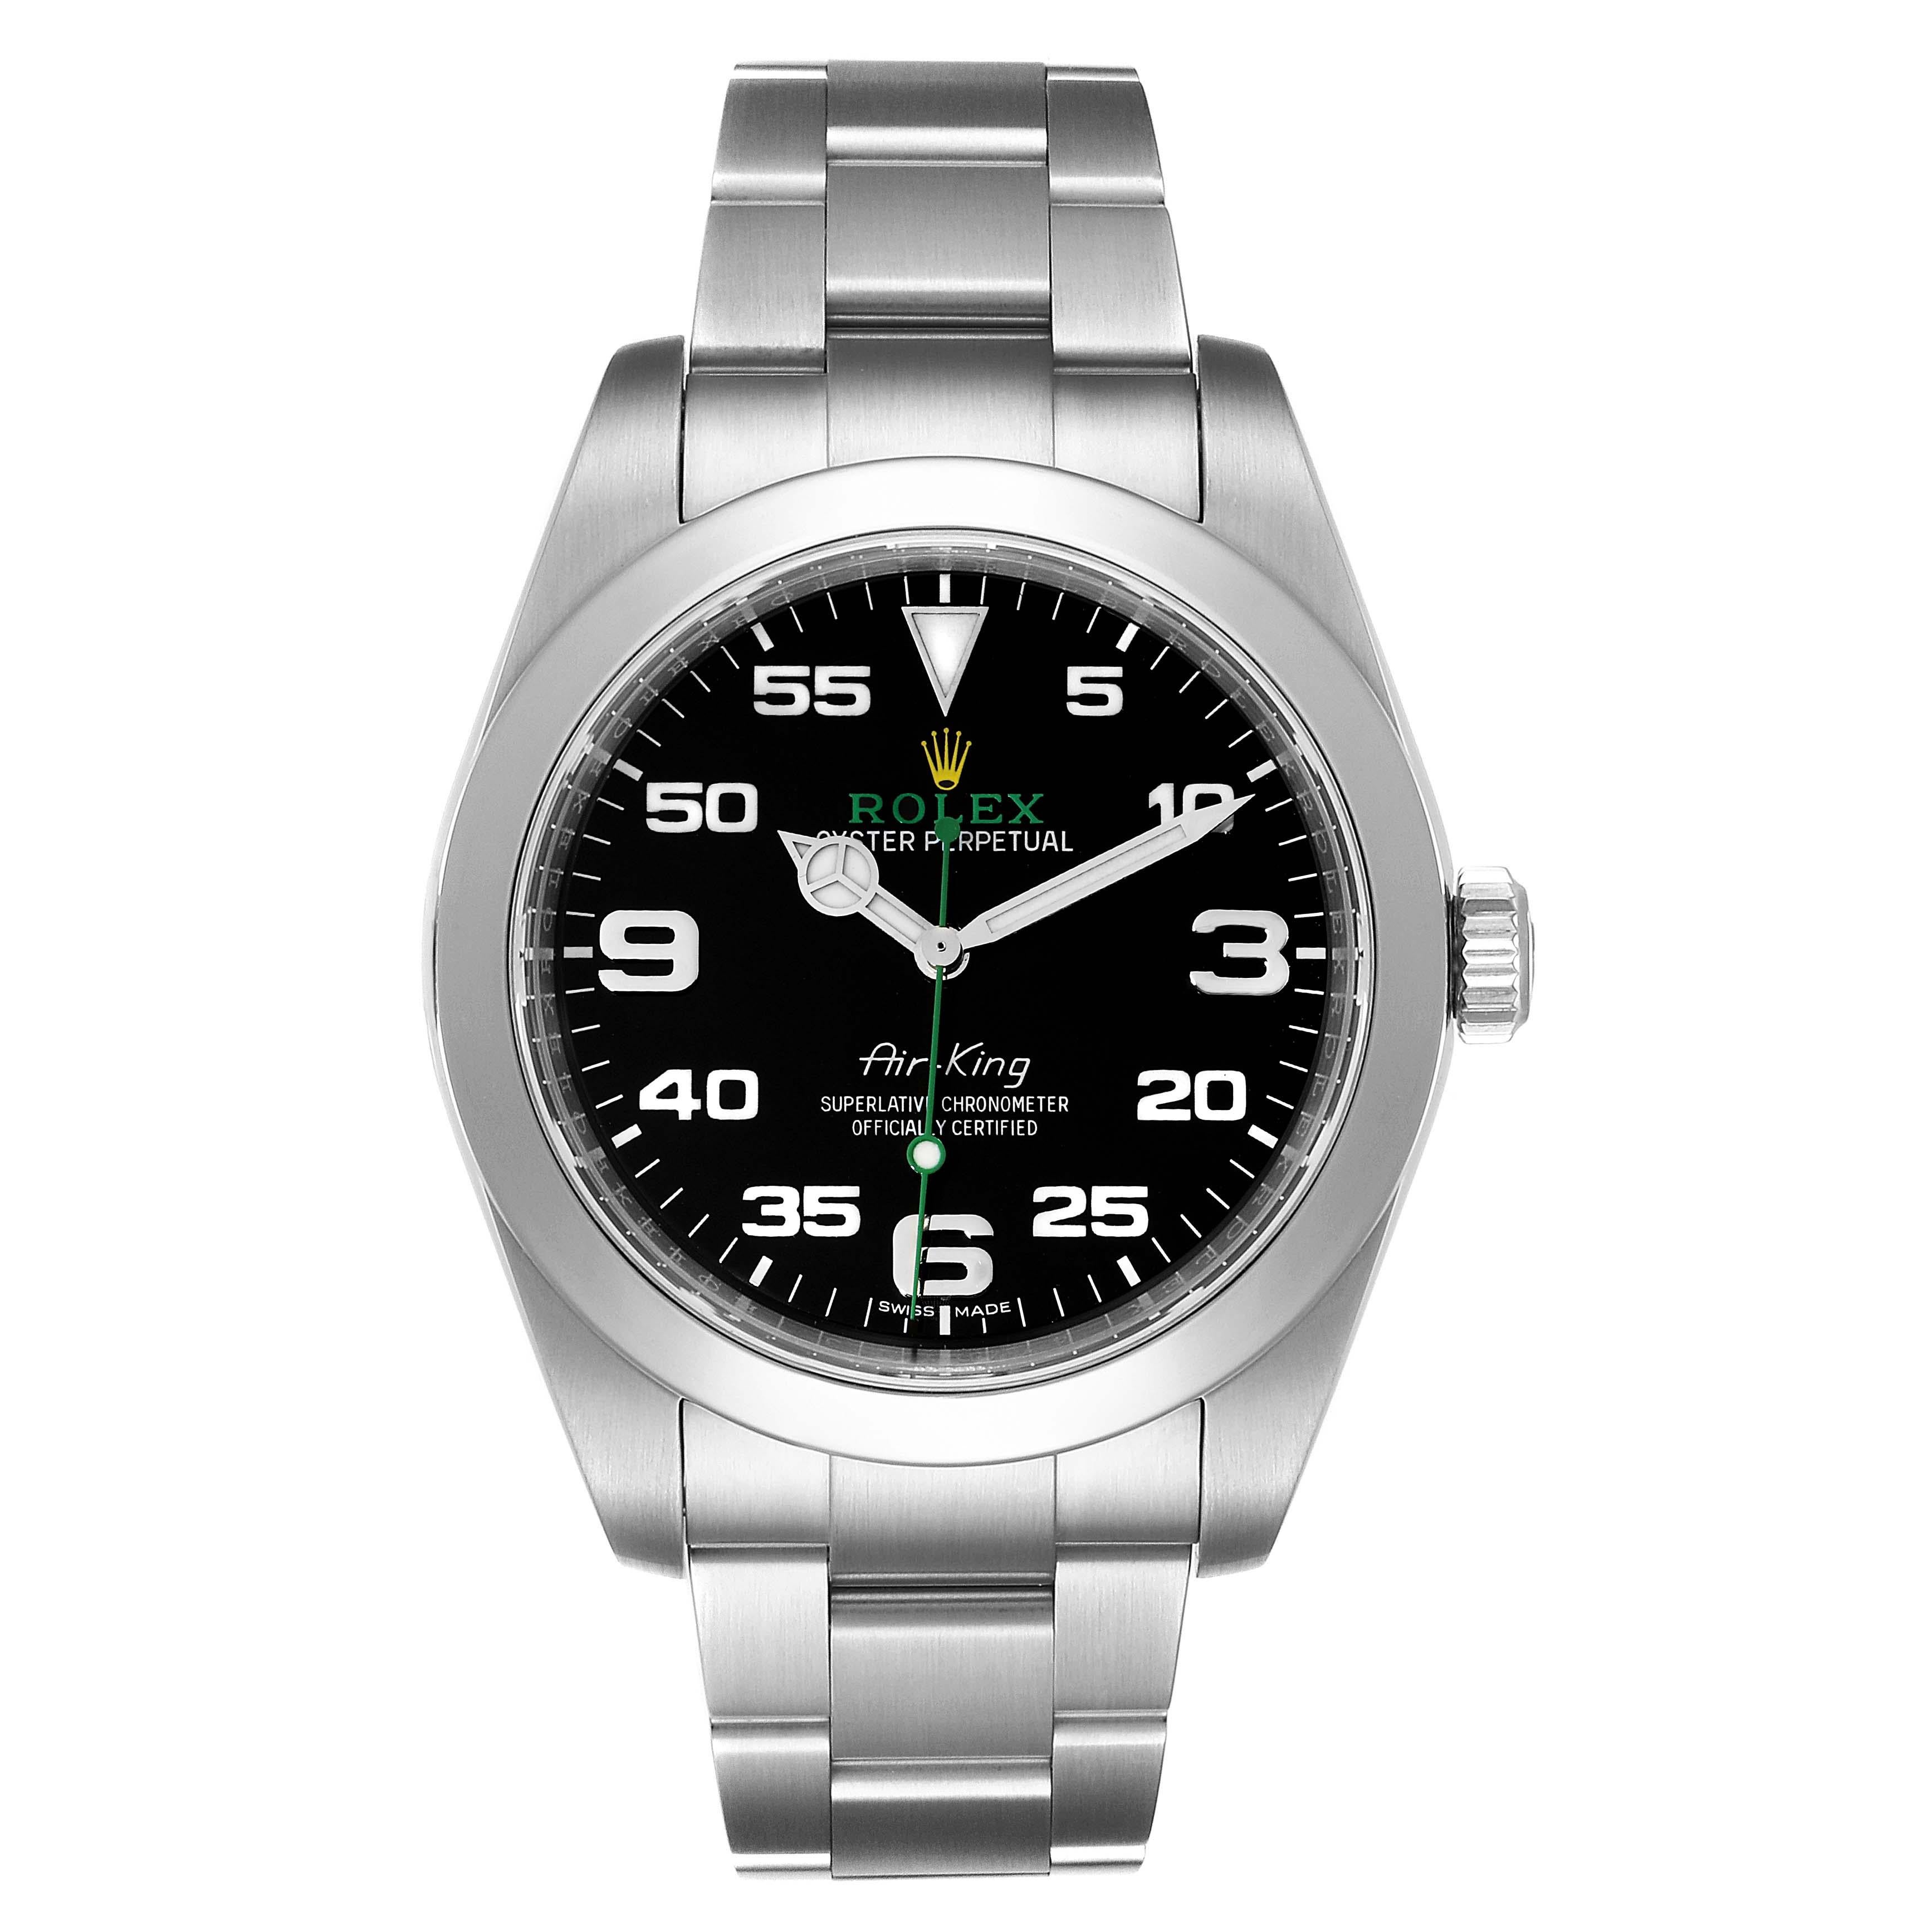 Rolex Oyster Perpetual Air King 40mm Green Hand Steel Mens Watch 116900. Officially certified chronometer self-winding movement. Stainless steel case 40.0 mm in diameter. Rolex logo on a crown. Stainless steel smooth domed bezel. Scratch resistant